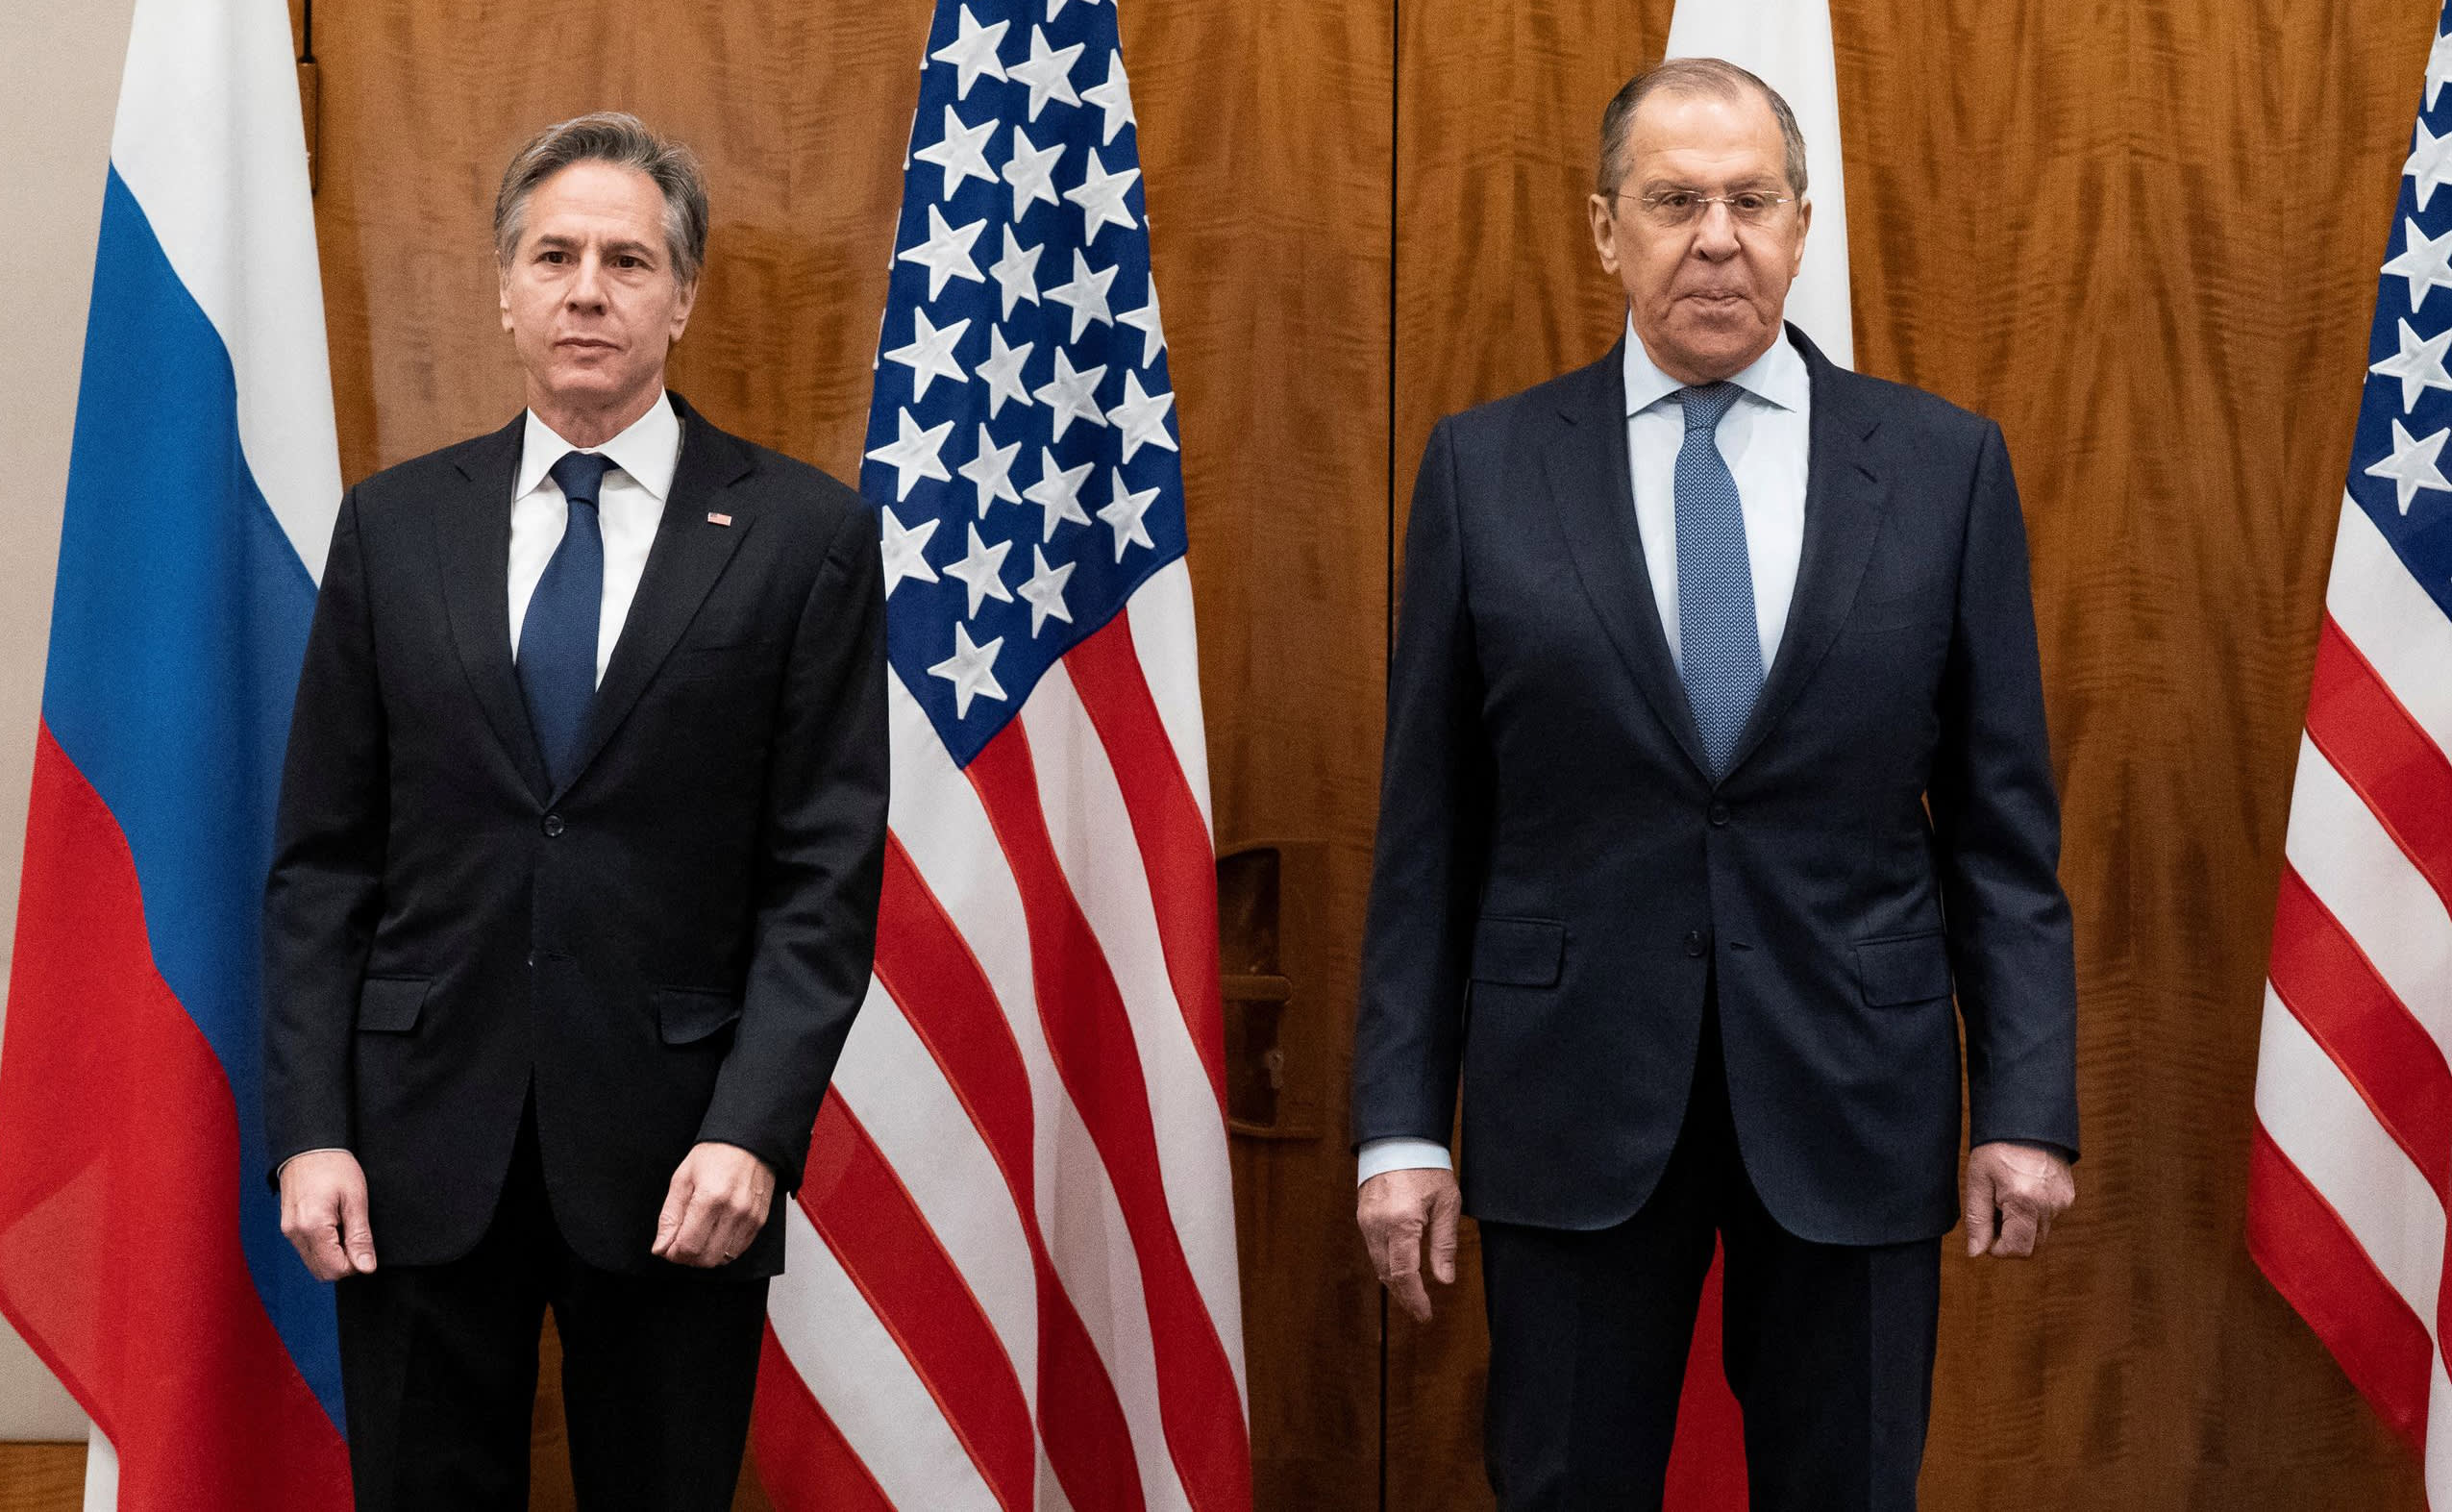 Secretary of State Blinken warns of severe response if a single Russian force enters Ukraine in an aggressive way